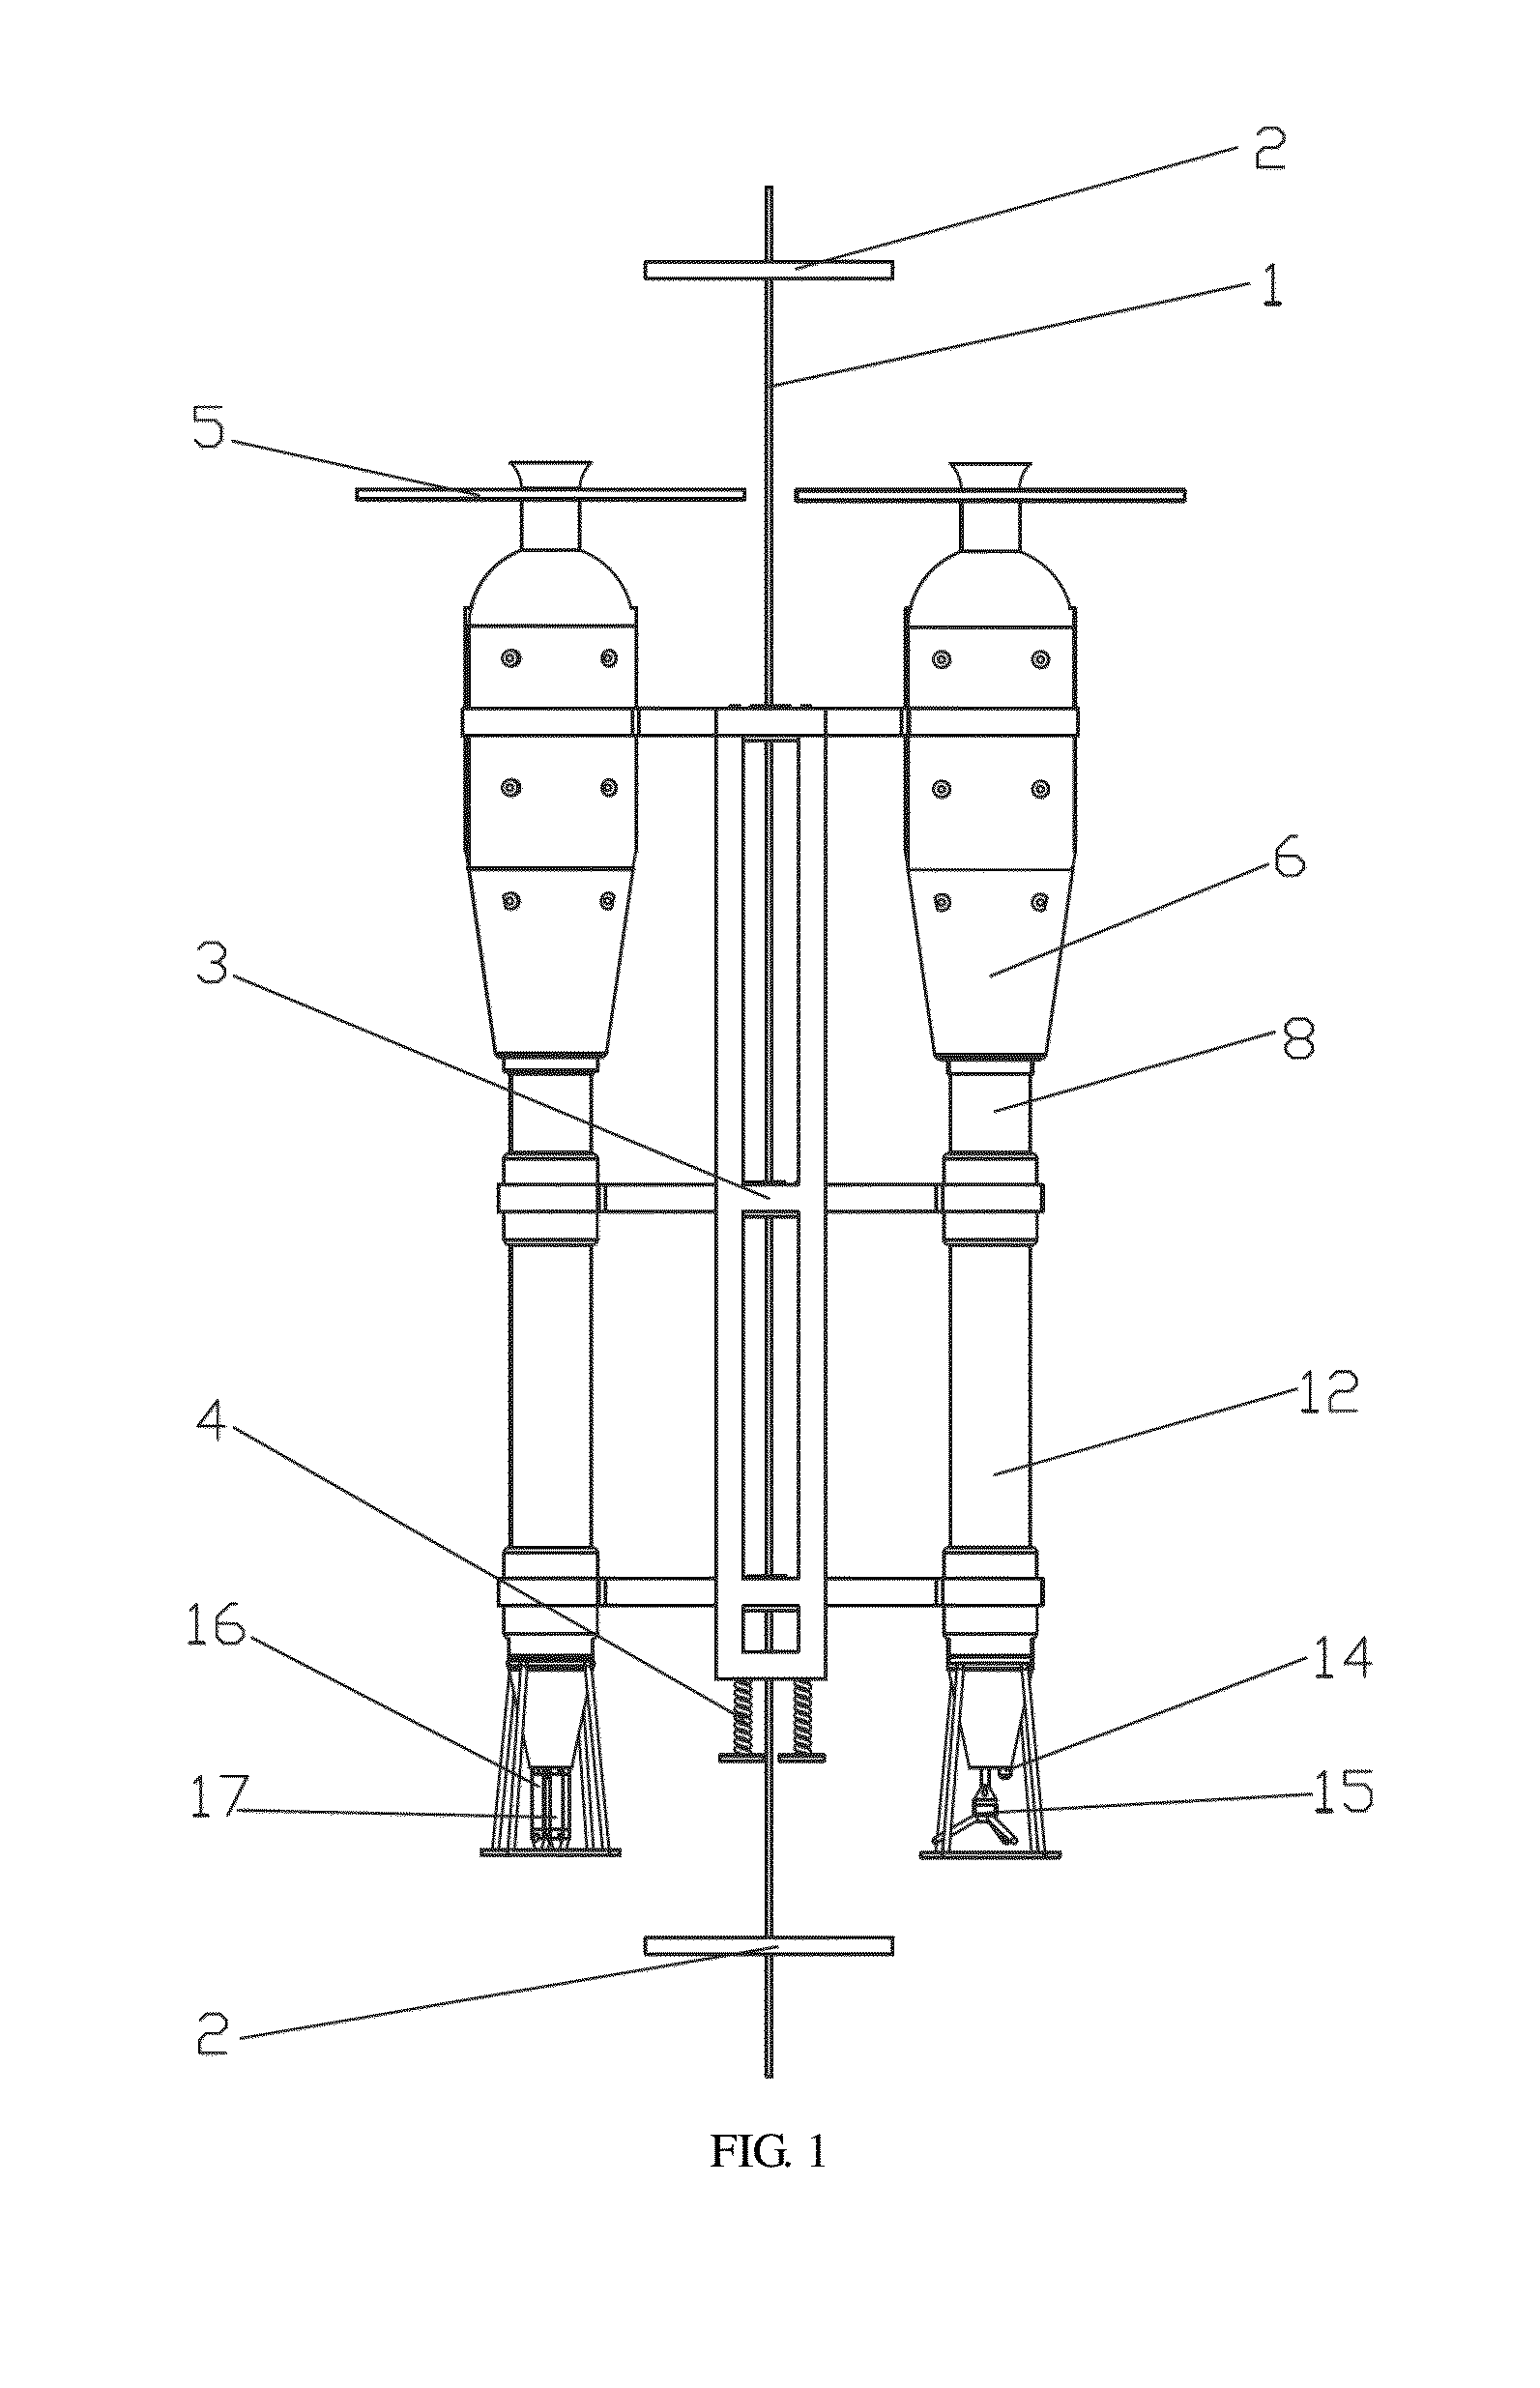 Method for the measurement of turbulence by using reciprocating ocean microstructure profiler